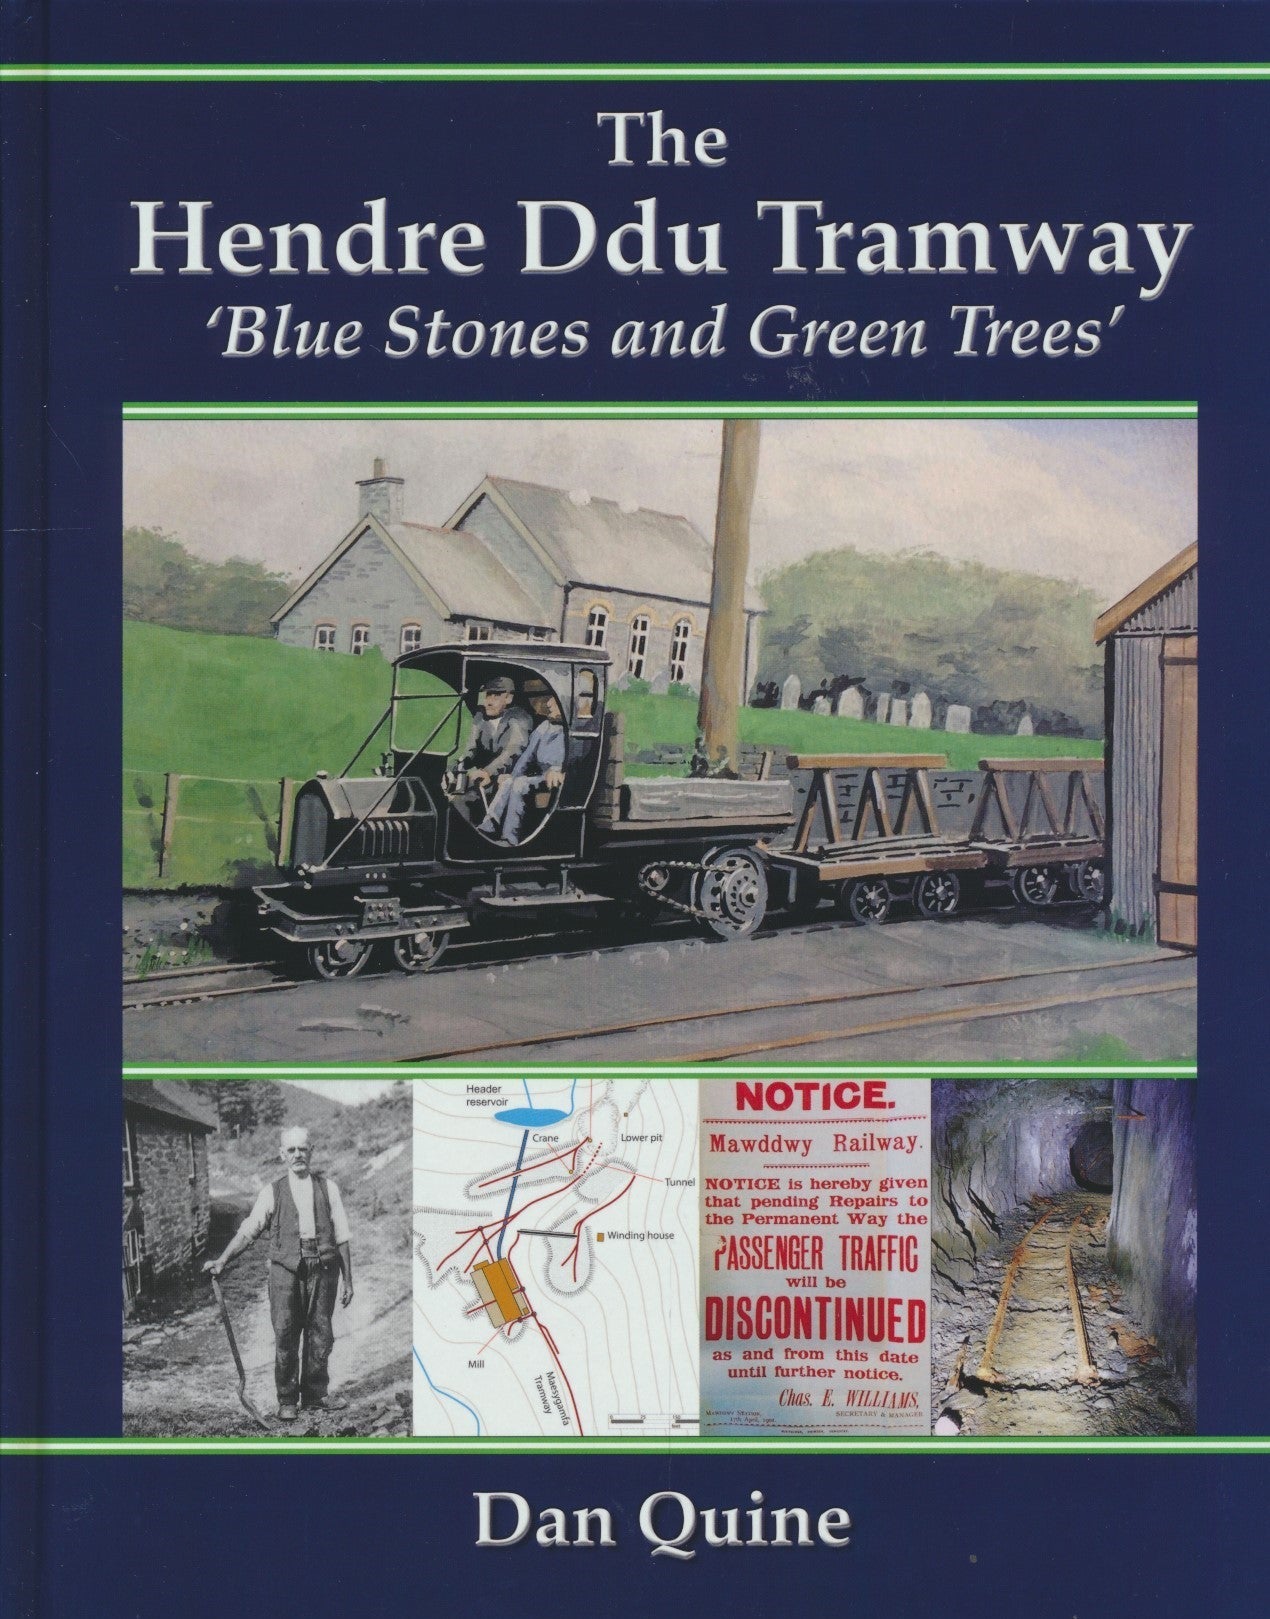 The Hendre Ddu Tramway - 'Blue Stones and Green Trees'